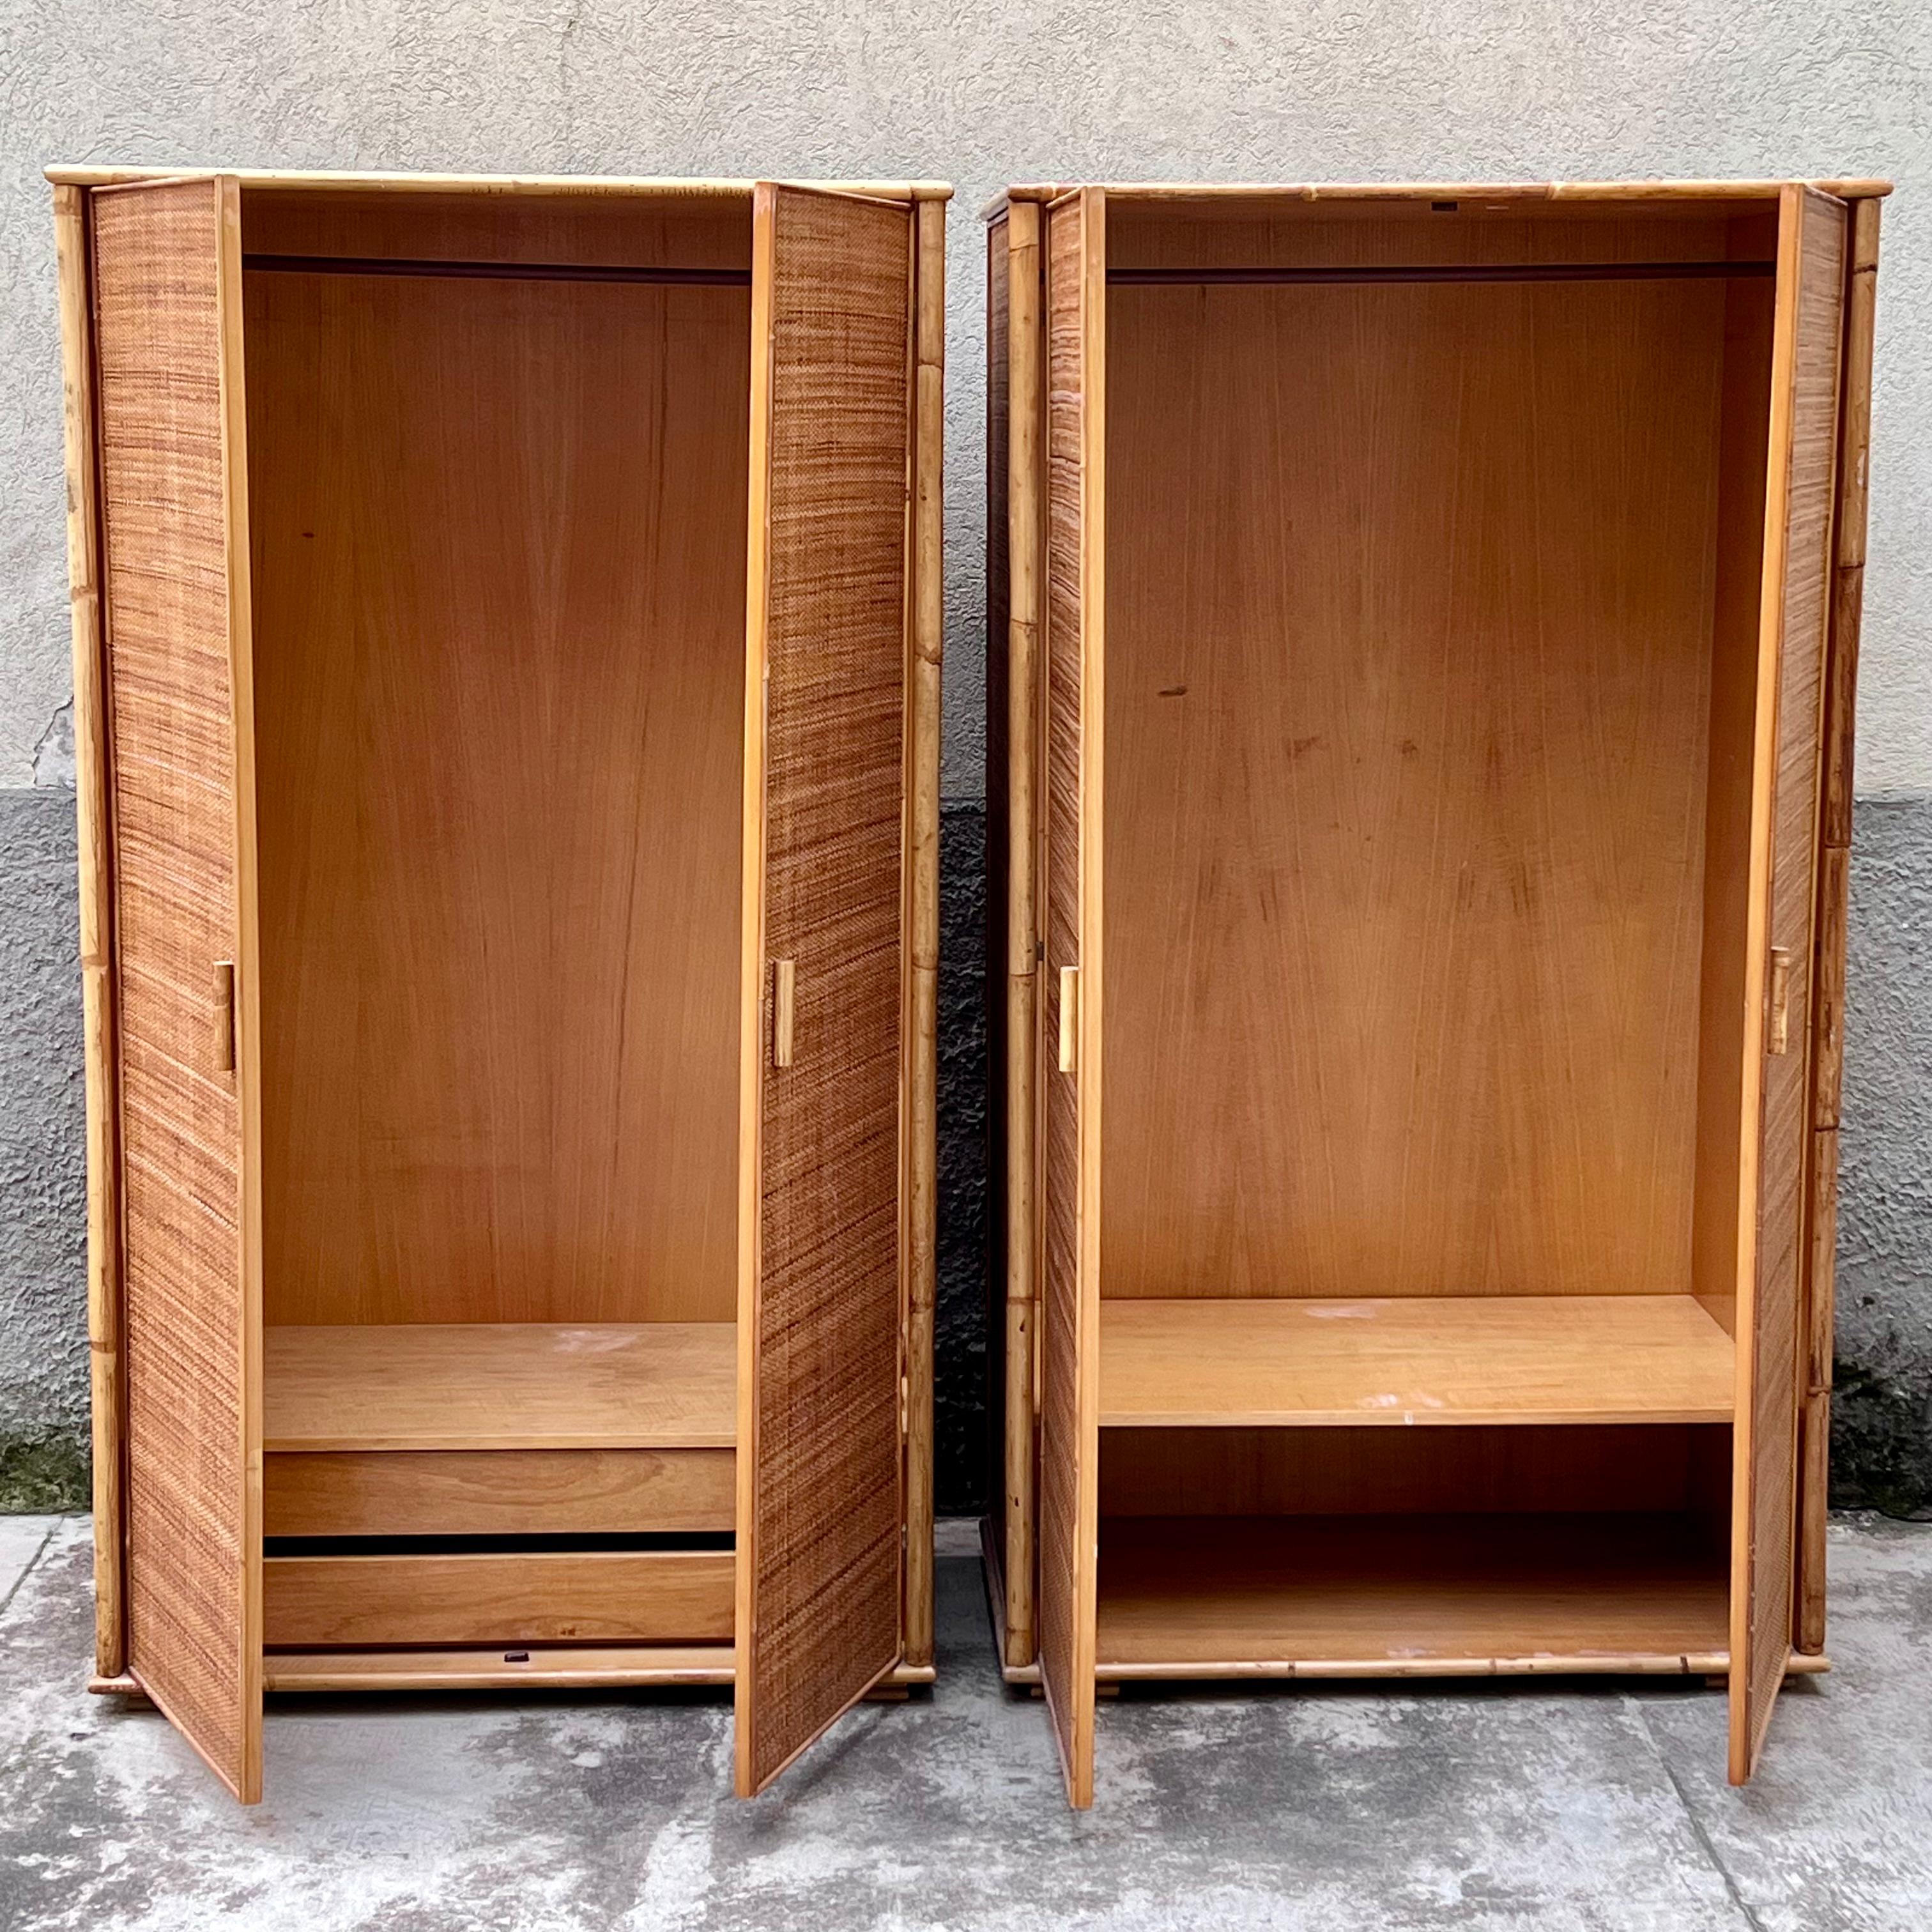 Beautiful and practical closet made of rattan and bamboo made in Italy in the 1960s. with. its vintage style, still in original and excellent condition can be placed in youthful environments, in a holiday home, also ideal for second homes by the